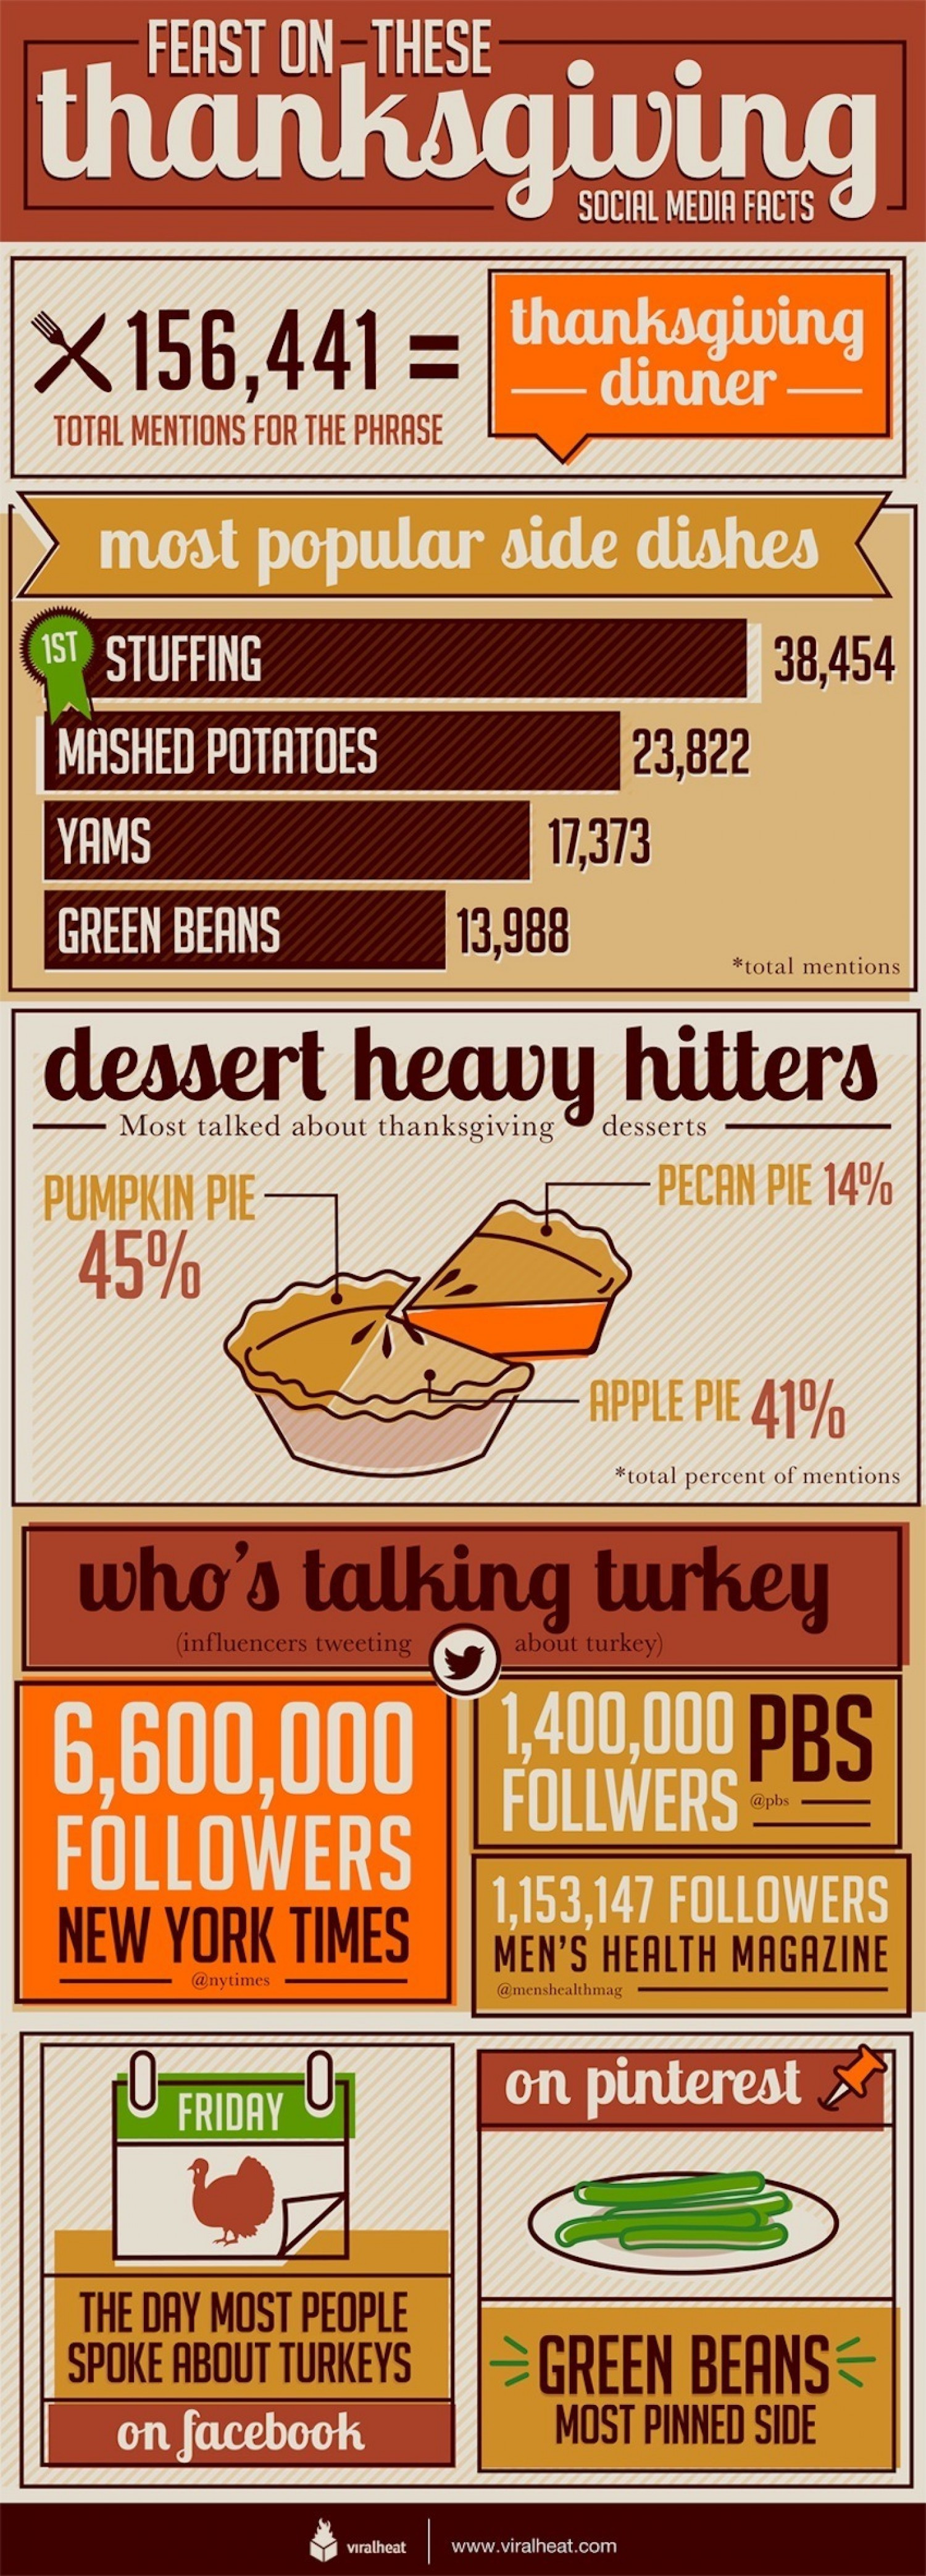 Turkey And Thanksgiving Facts
 Social Media Thanksgiving Facts